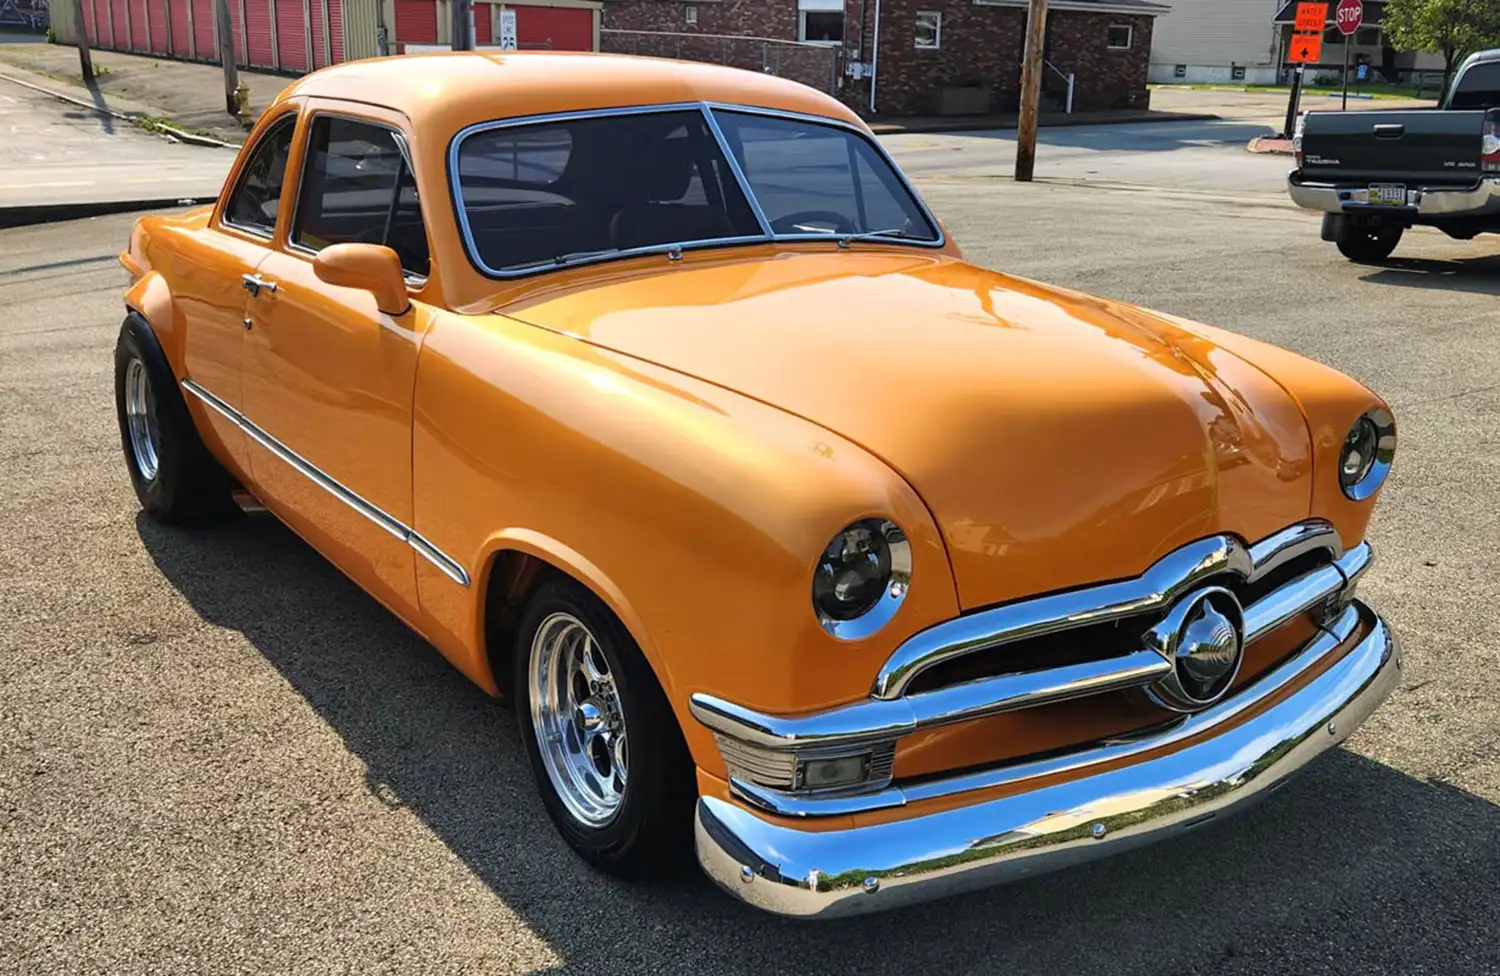 1950 Ford Custom Deluxe Club Coupe: A Bright Tangerine Dream